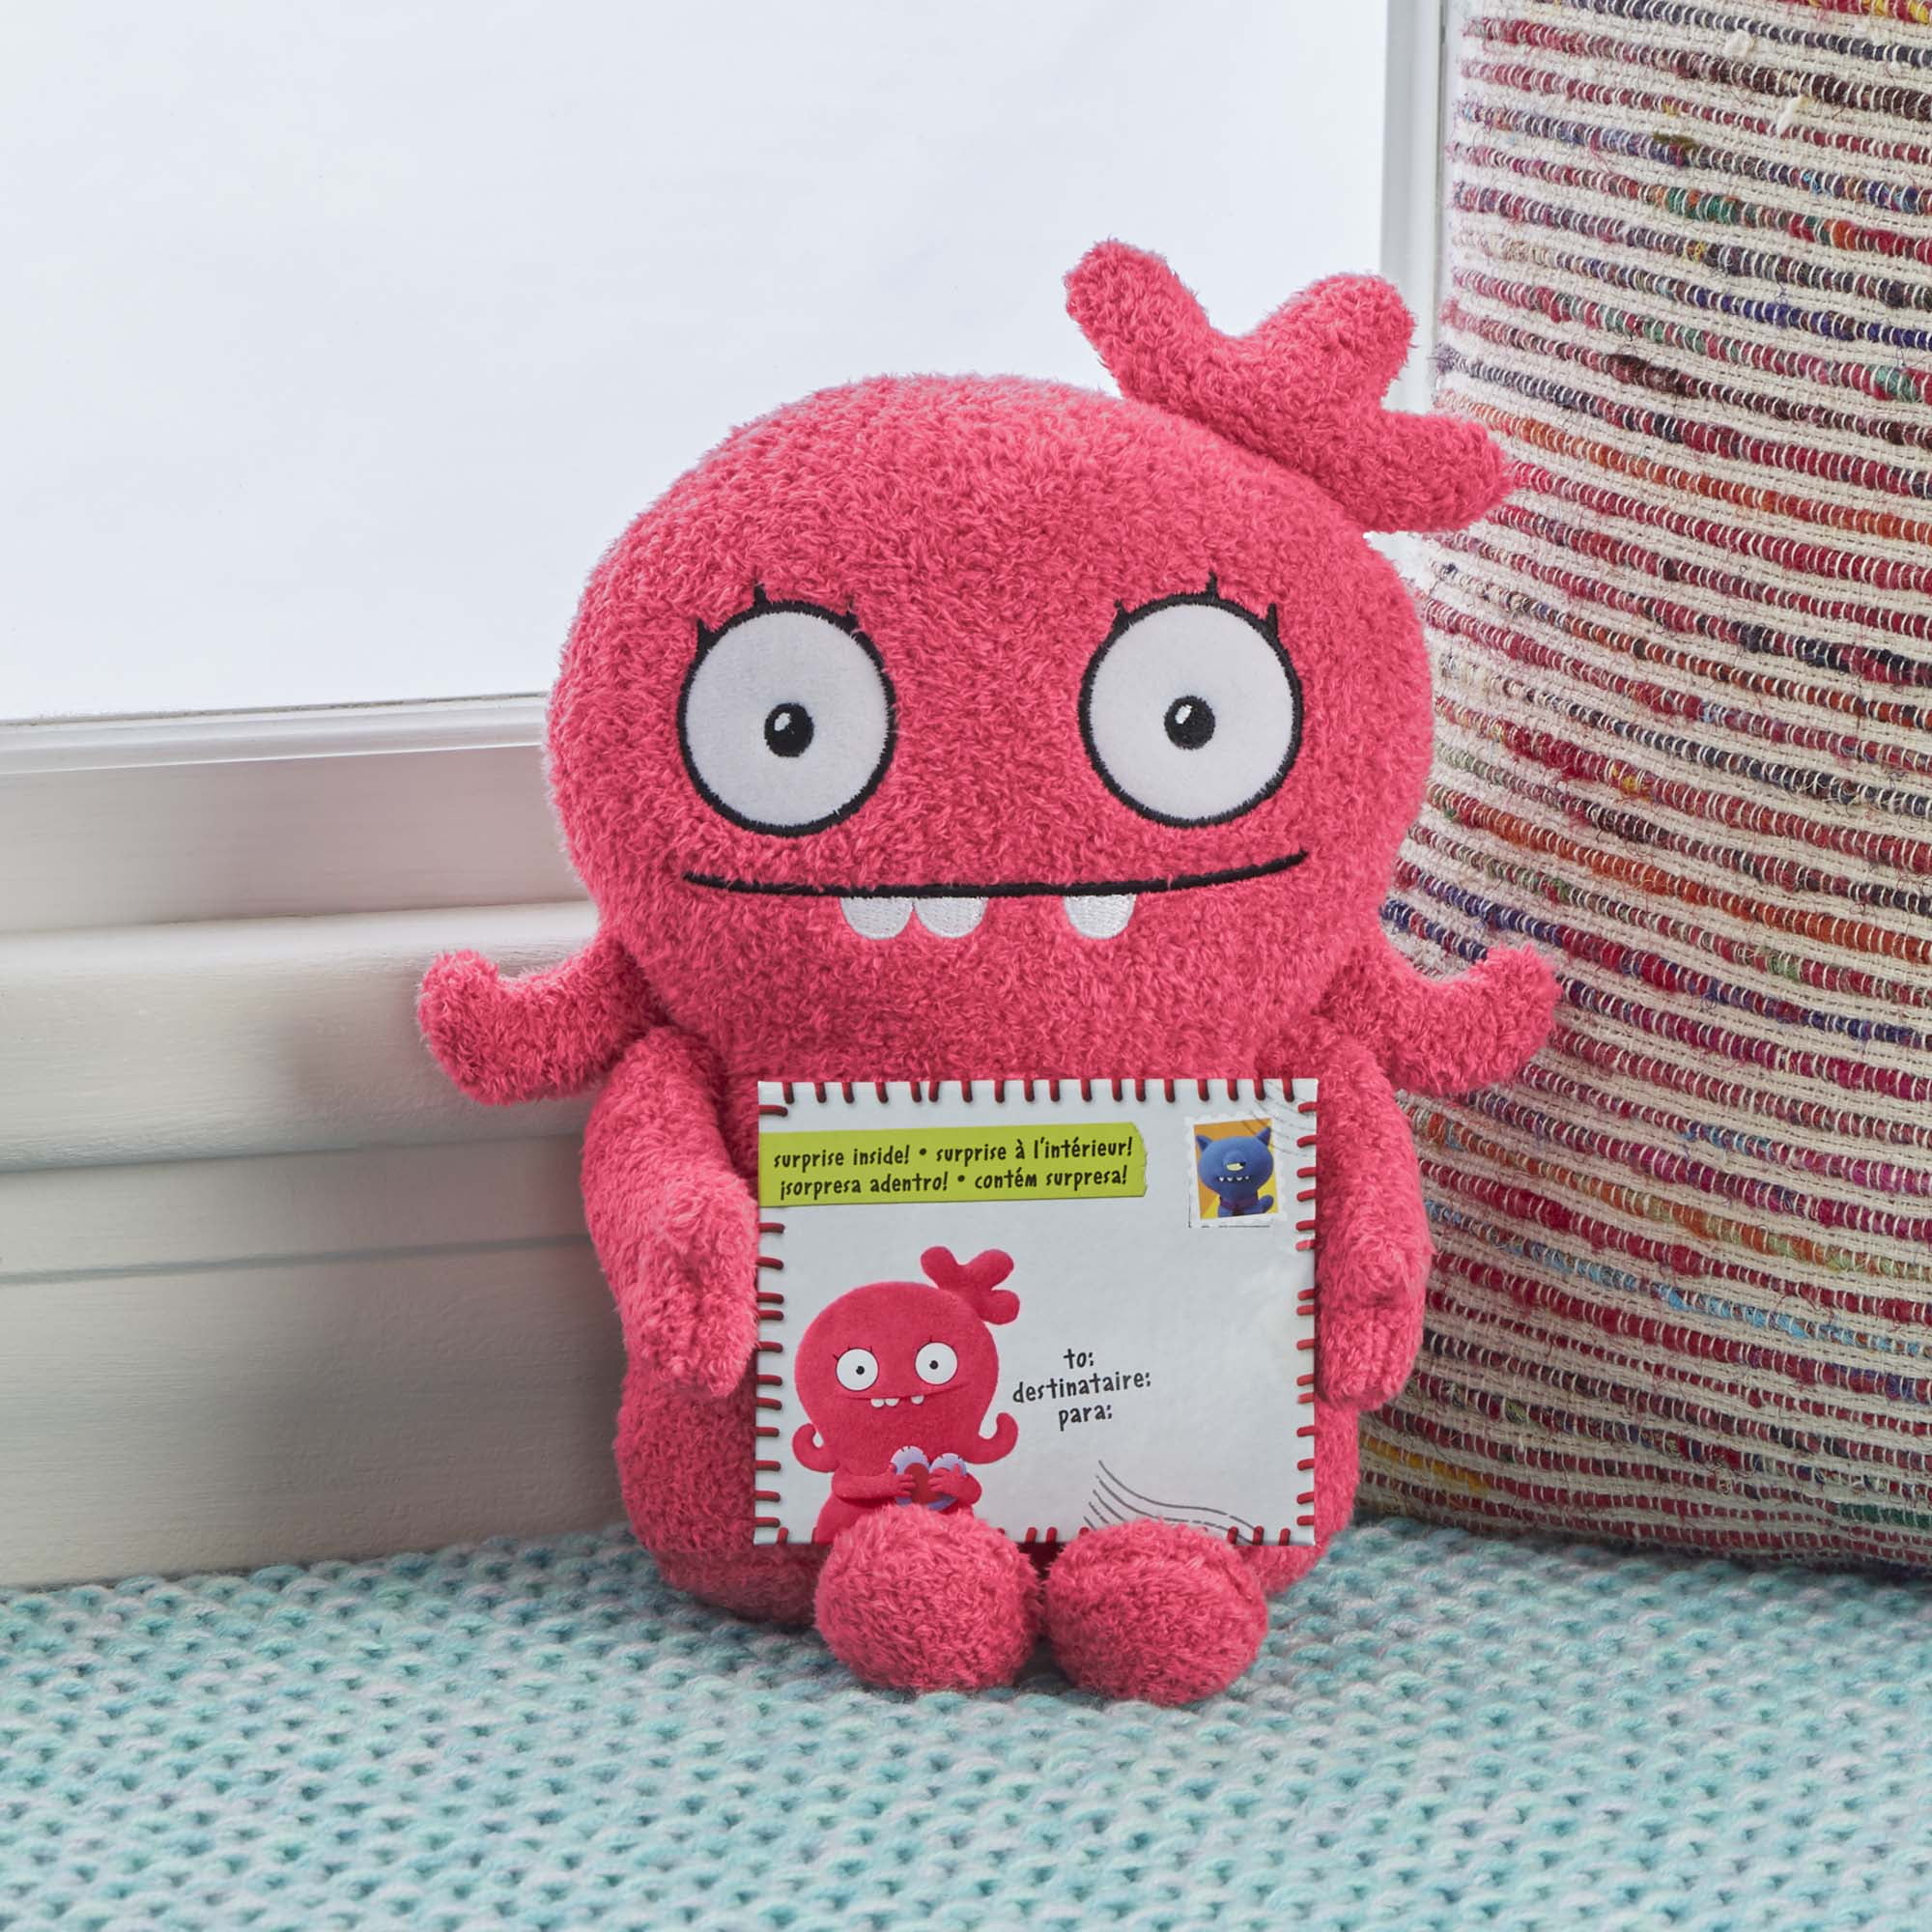 Uglydolls Yours Truly Moxy Stuffed Plush Toy 10 Inches Tall 2019 for sale online 